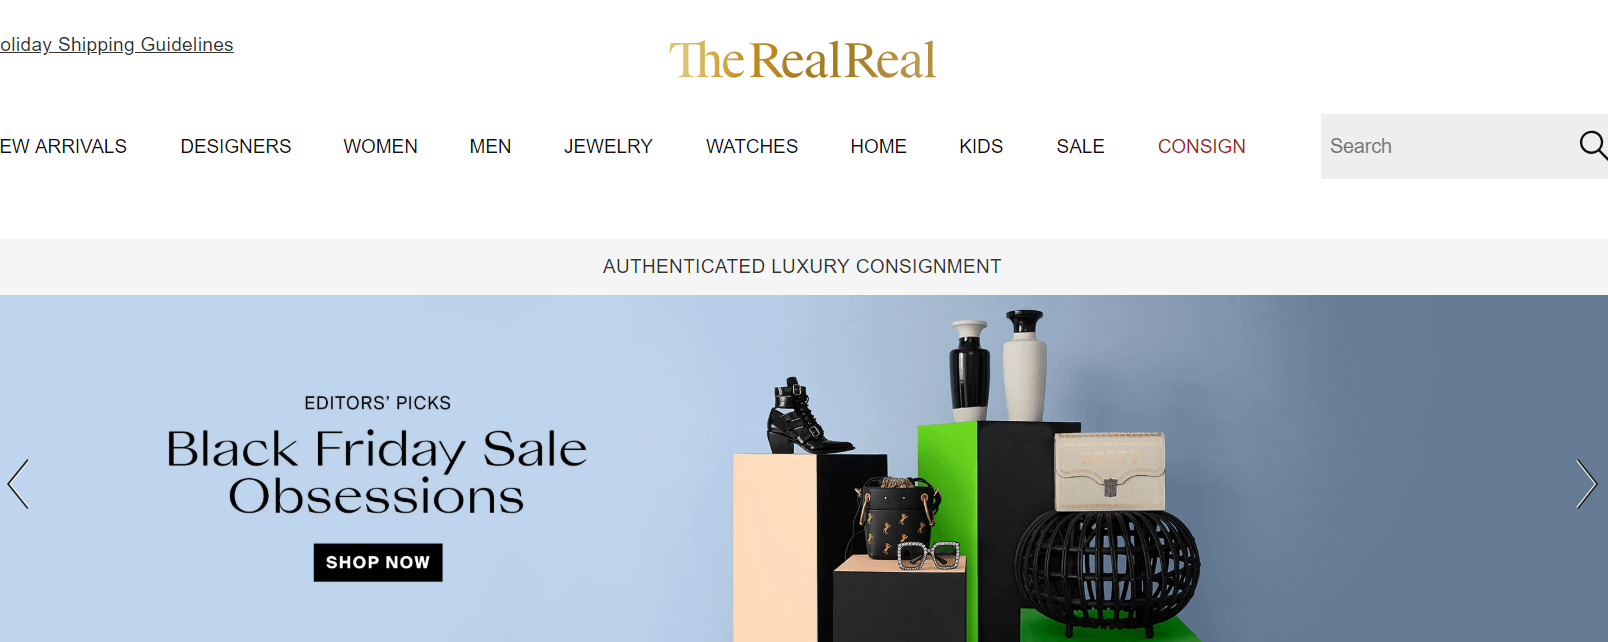 the realreal官网–therealreal 二手奢侈品电商交易网站